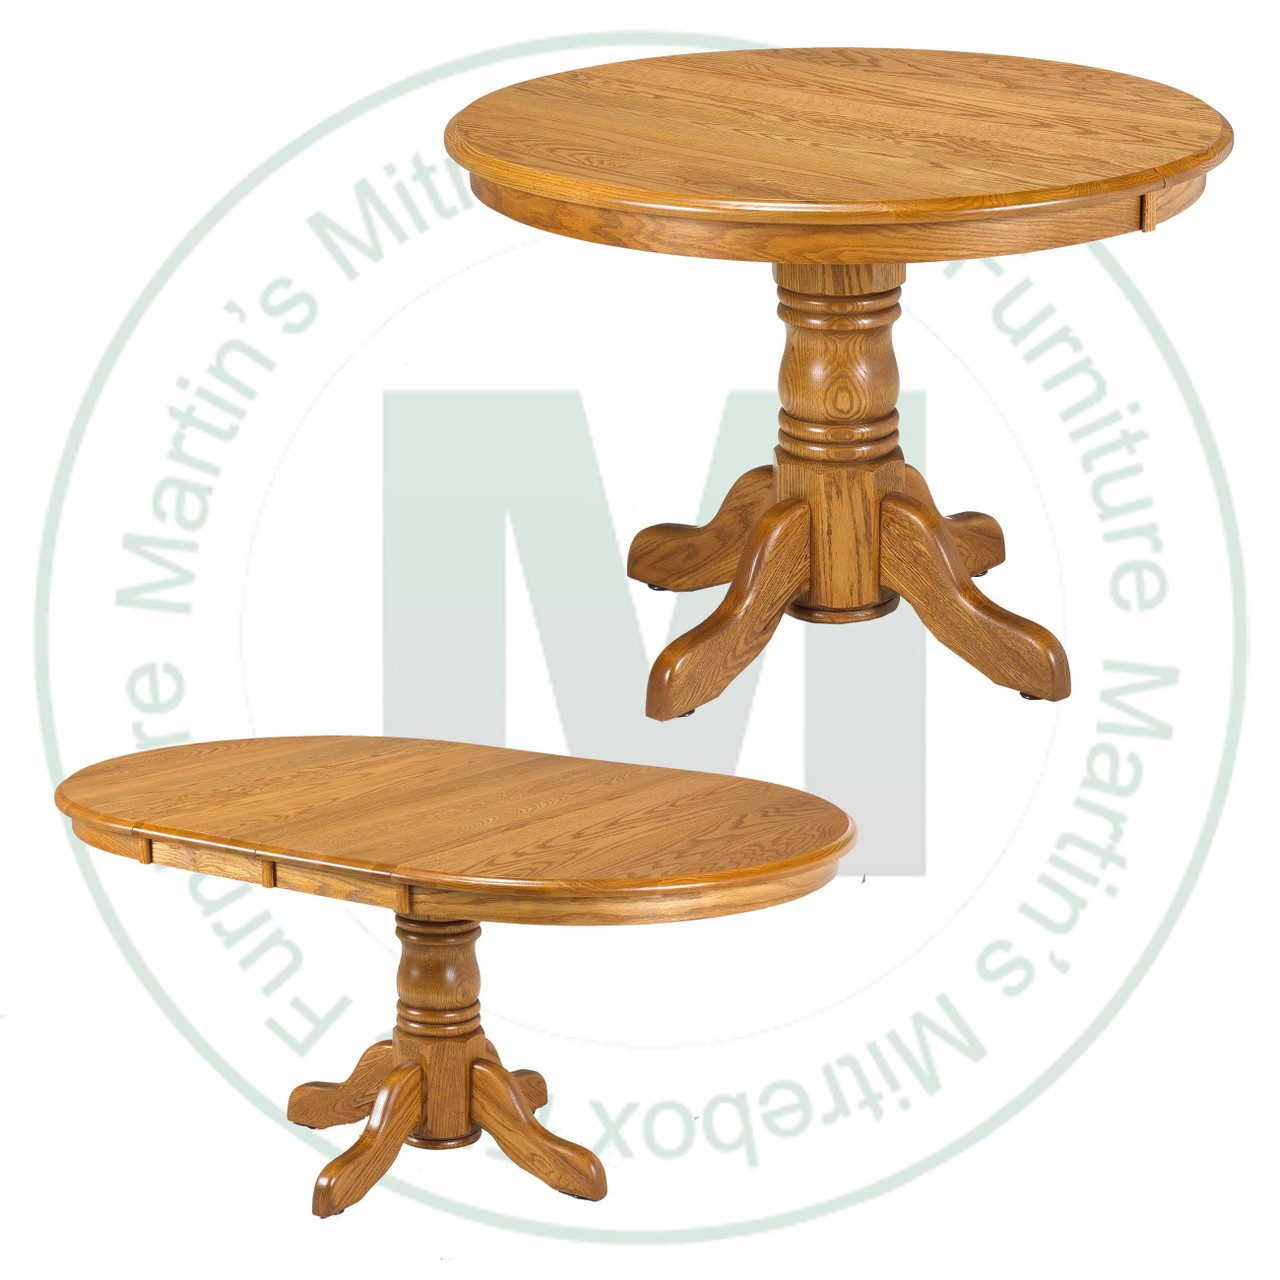 Maple Lancaster Collection Single Pedestal Table 54''D x 54''W x 30''H With 1 - 12'' Leaf. Table Has 1.25'' Thick Top